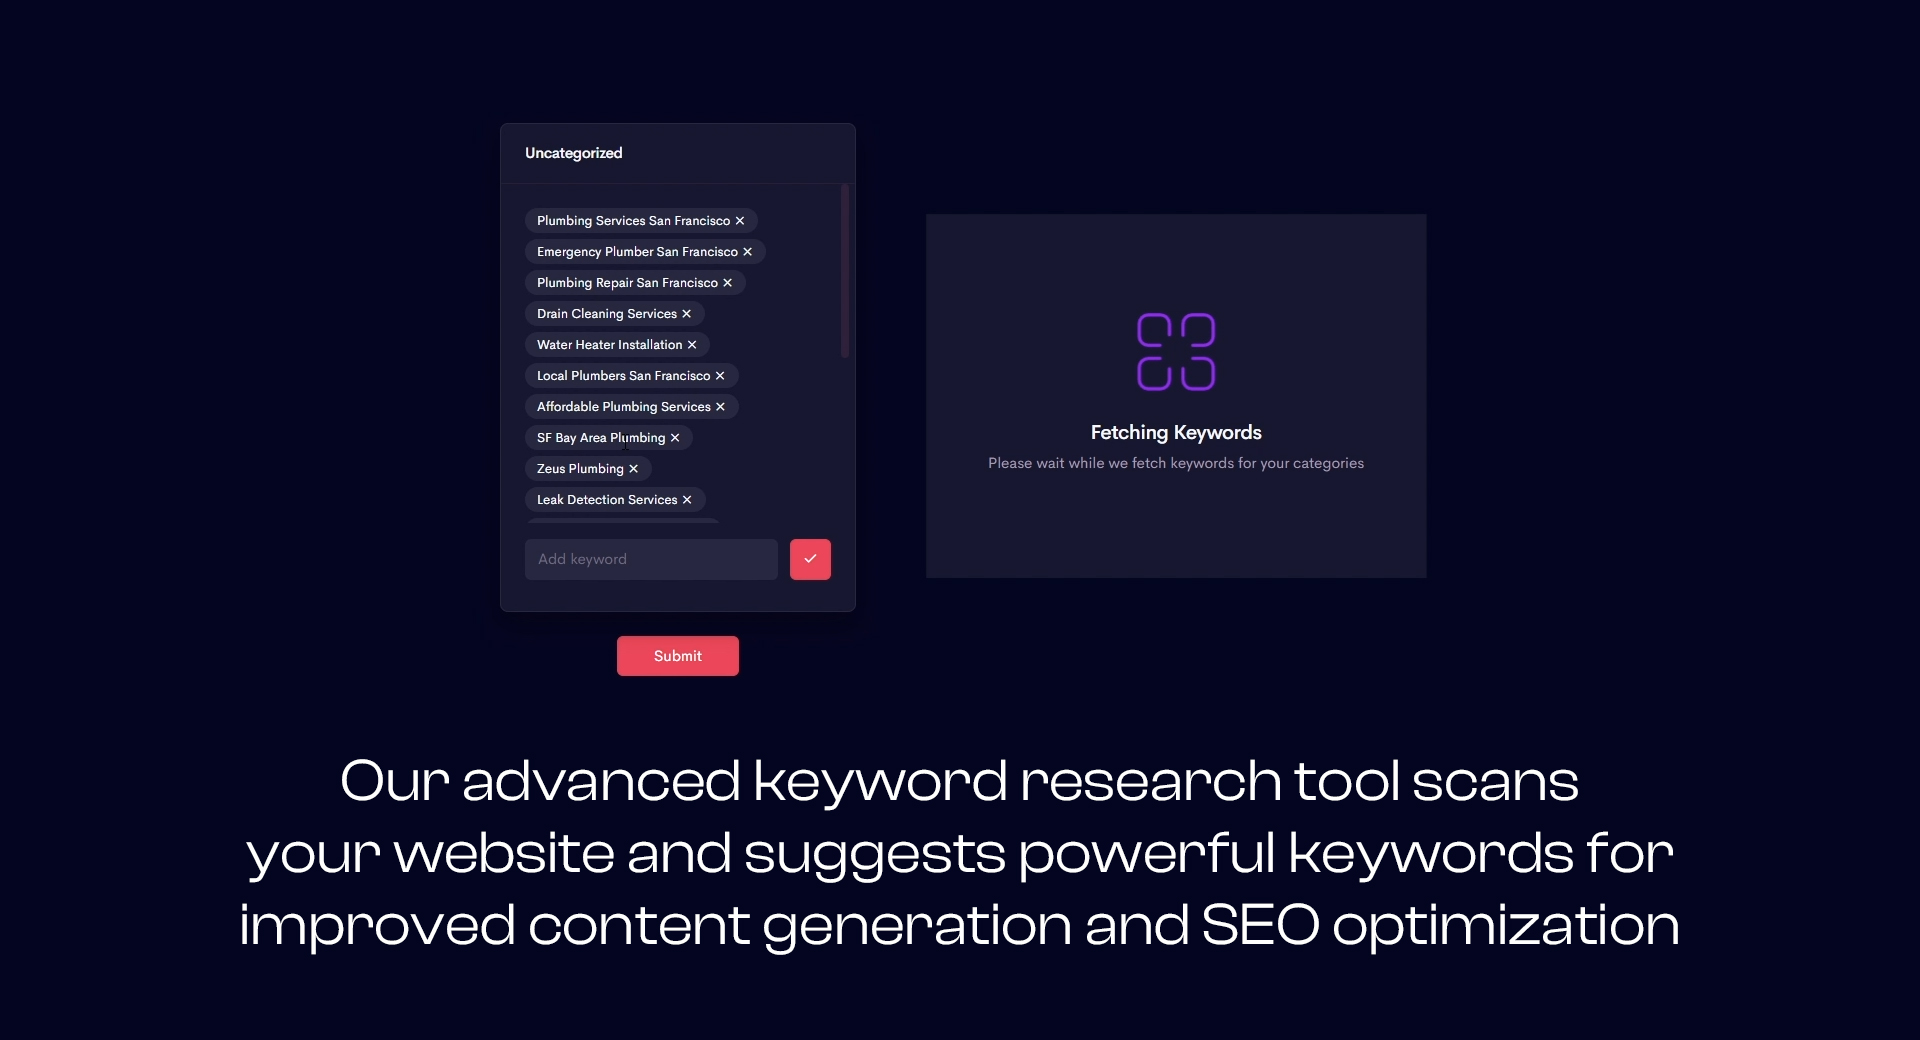 Our advanced keyword research tool scans your website and suggests powerful keywords for improved content generation and SEO optimization.